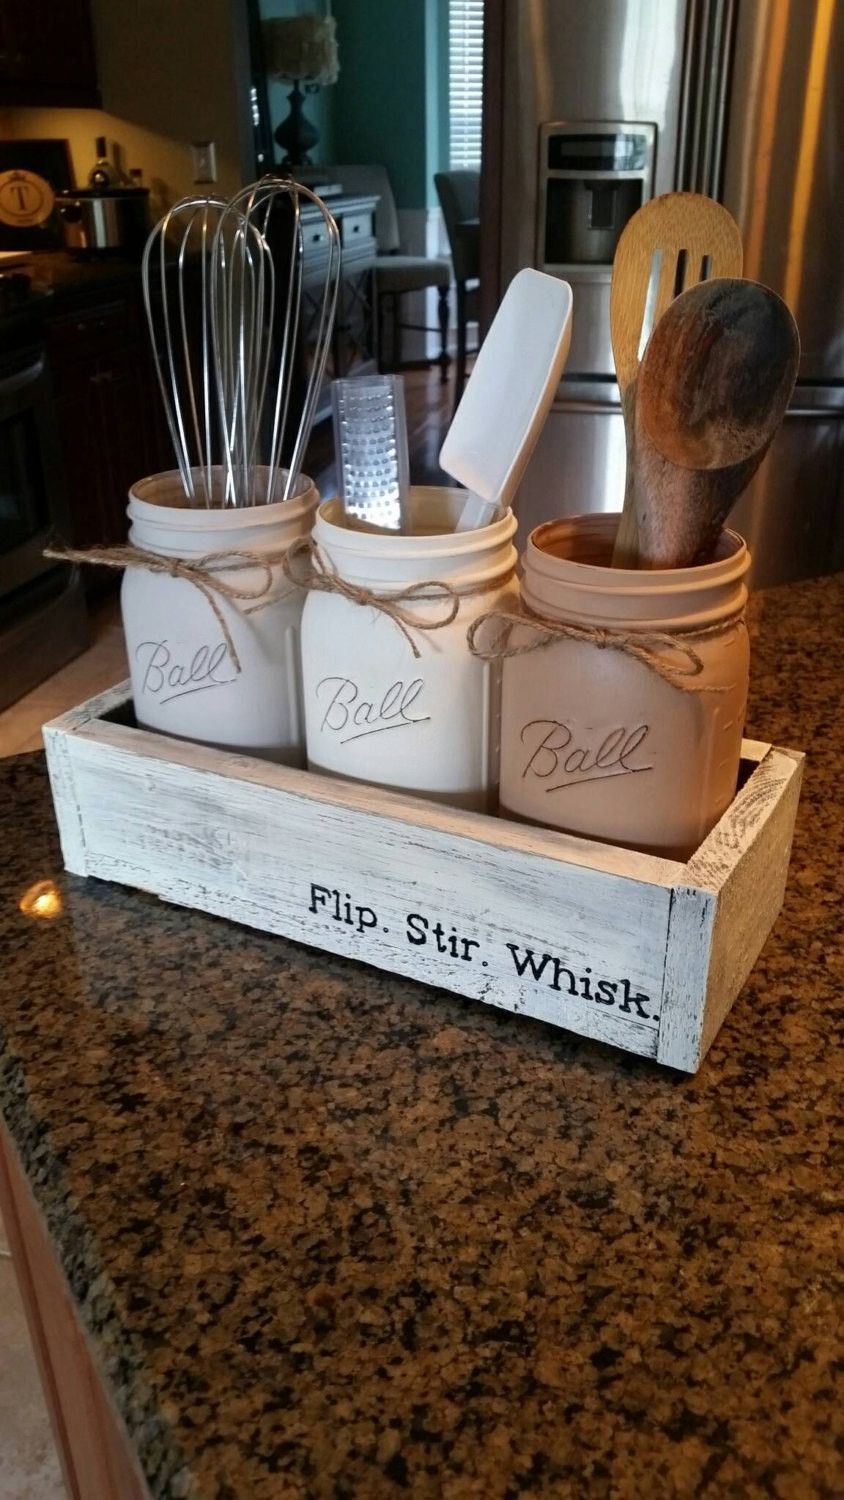 This is the perfect way to display your kitchen utensils in a charming, fun way! These make perfect housewarming gifts, and I’m